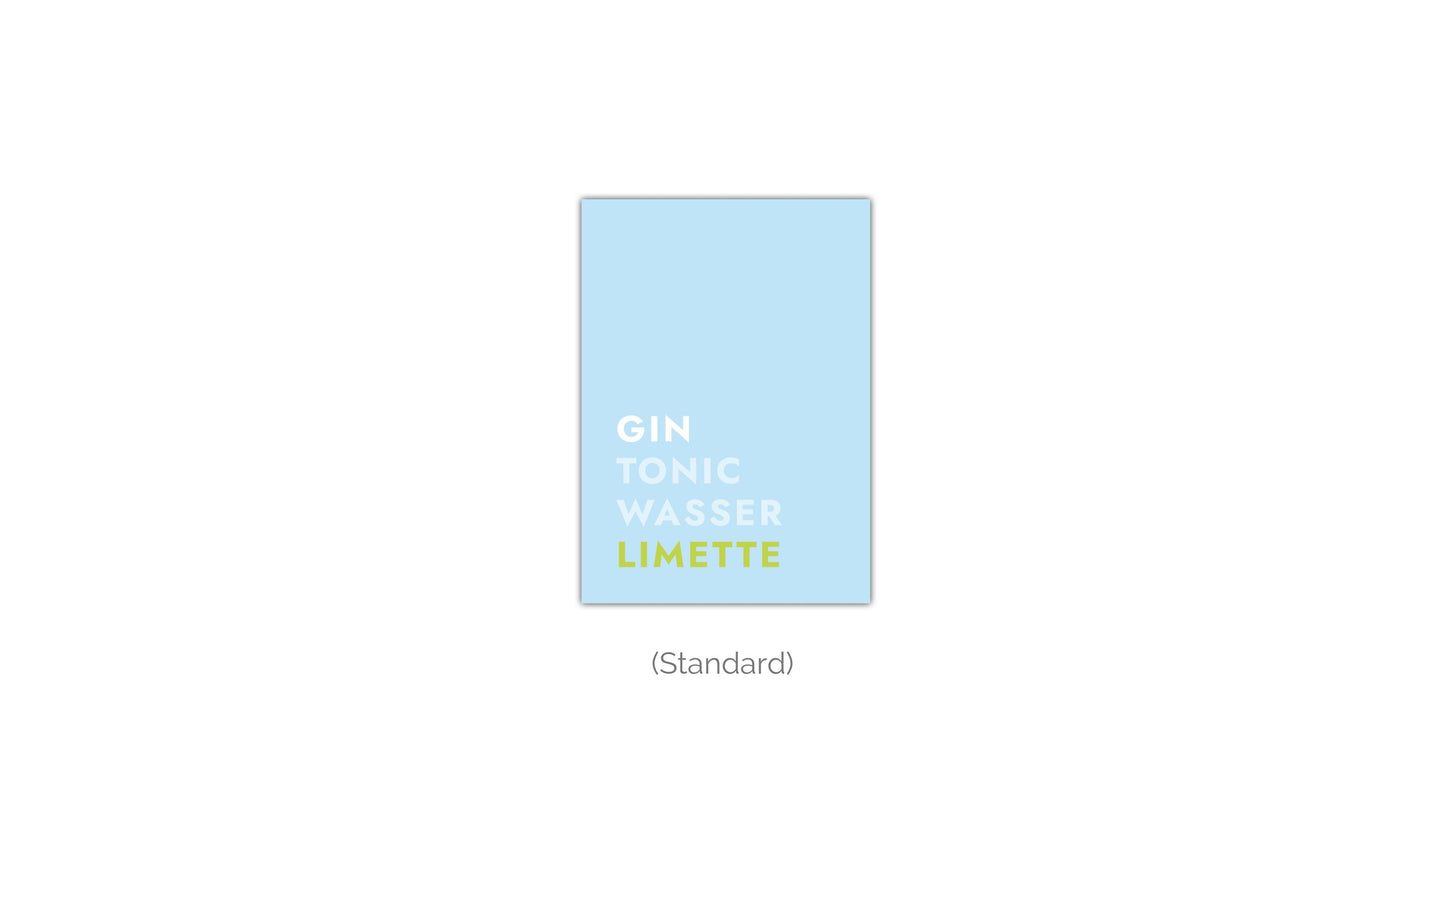 Poster Cocktail Gin Tonic Limette - Text